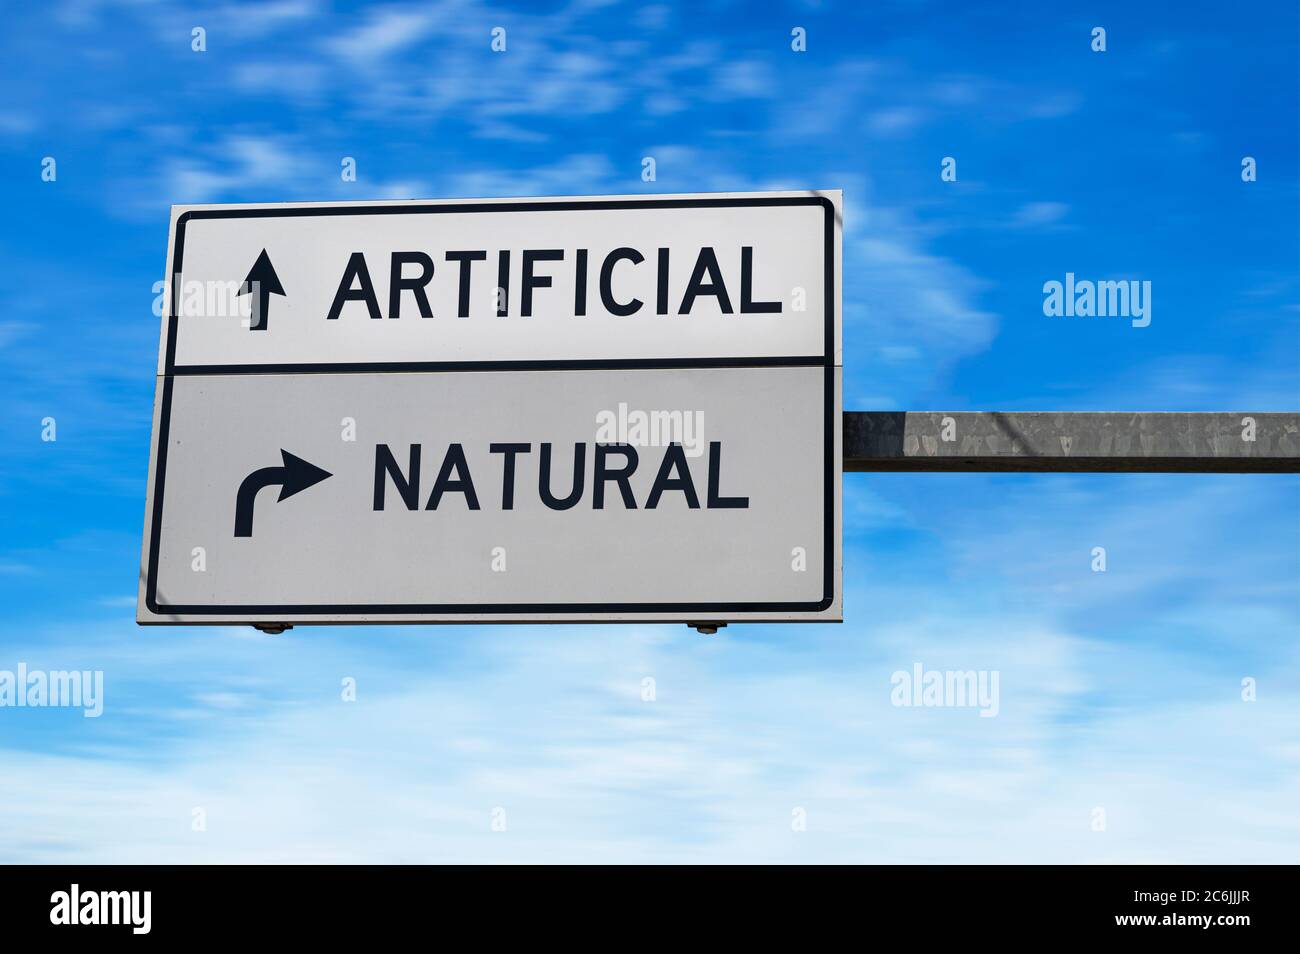 Artificial versus natural. White two street signs with arrow on metal pole. Directional road, Crossroads Road Sign, Two Arrow. Blue sky background. Stock Photo